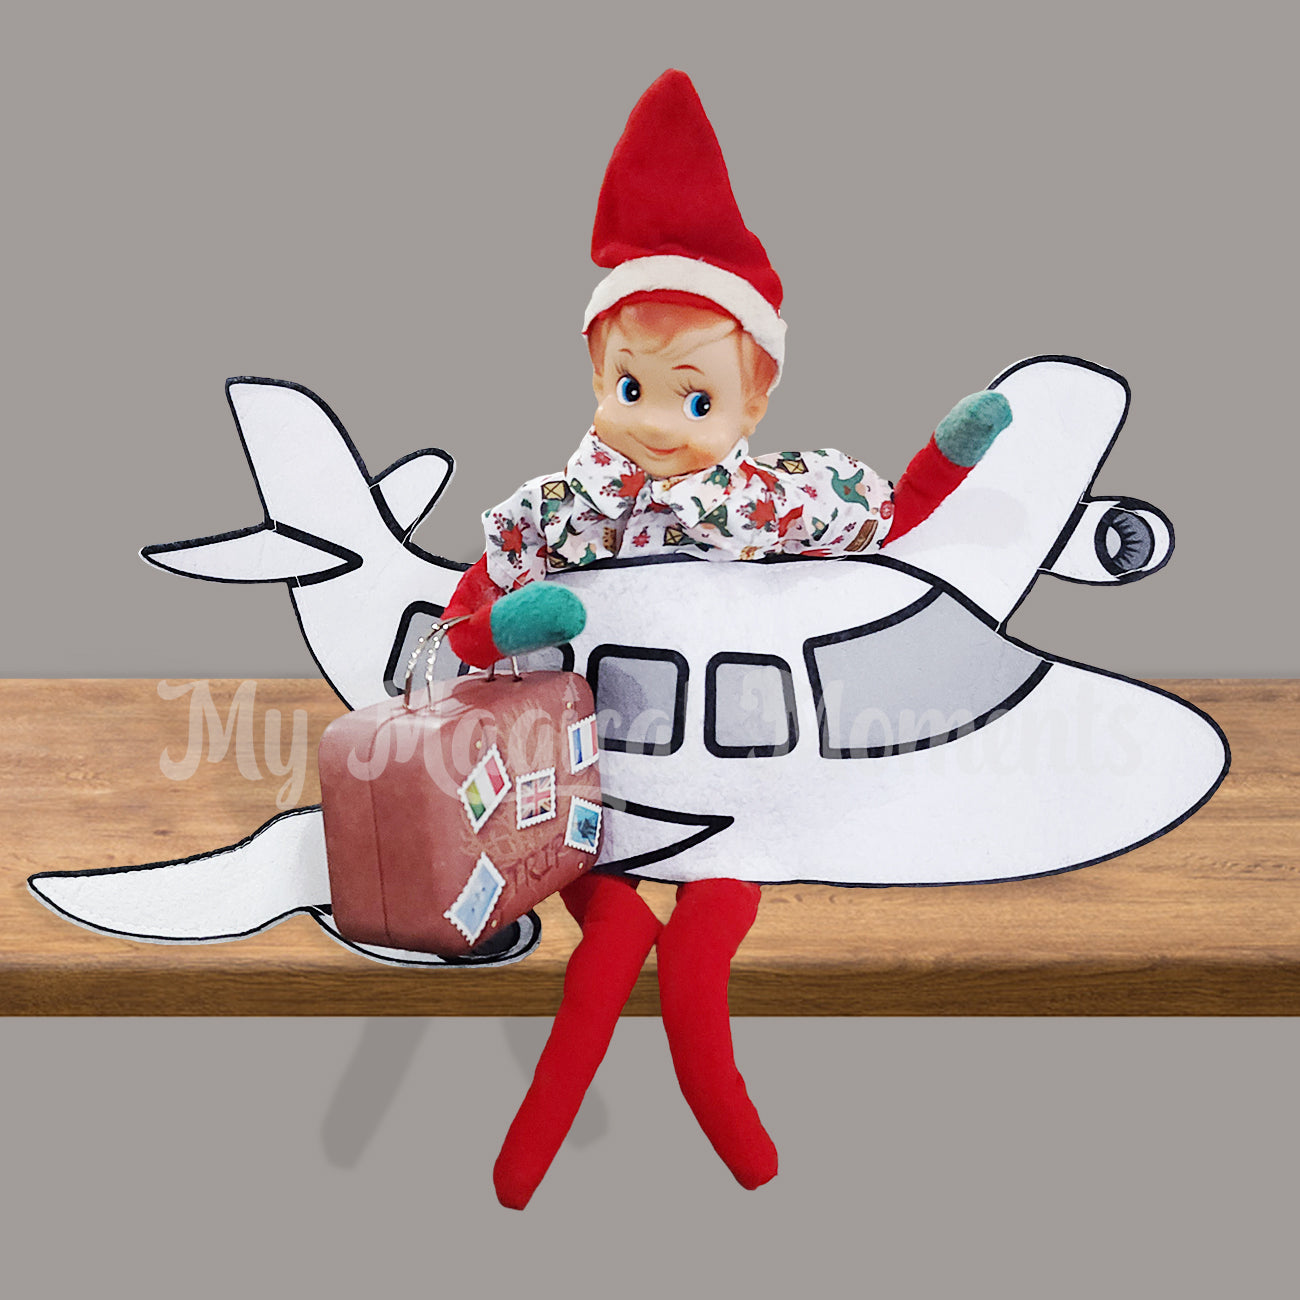 Vintage elf siting on a shelf holding a miniature suitcase in a plane costume